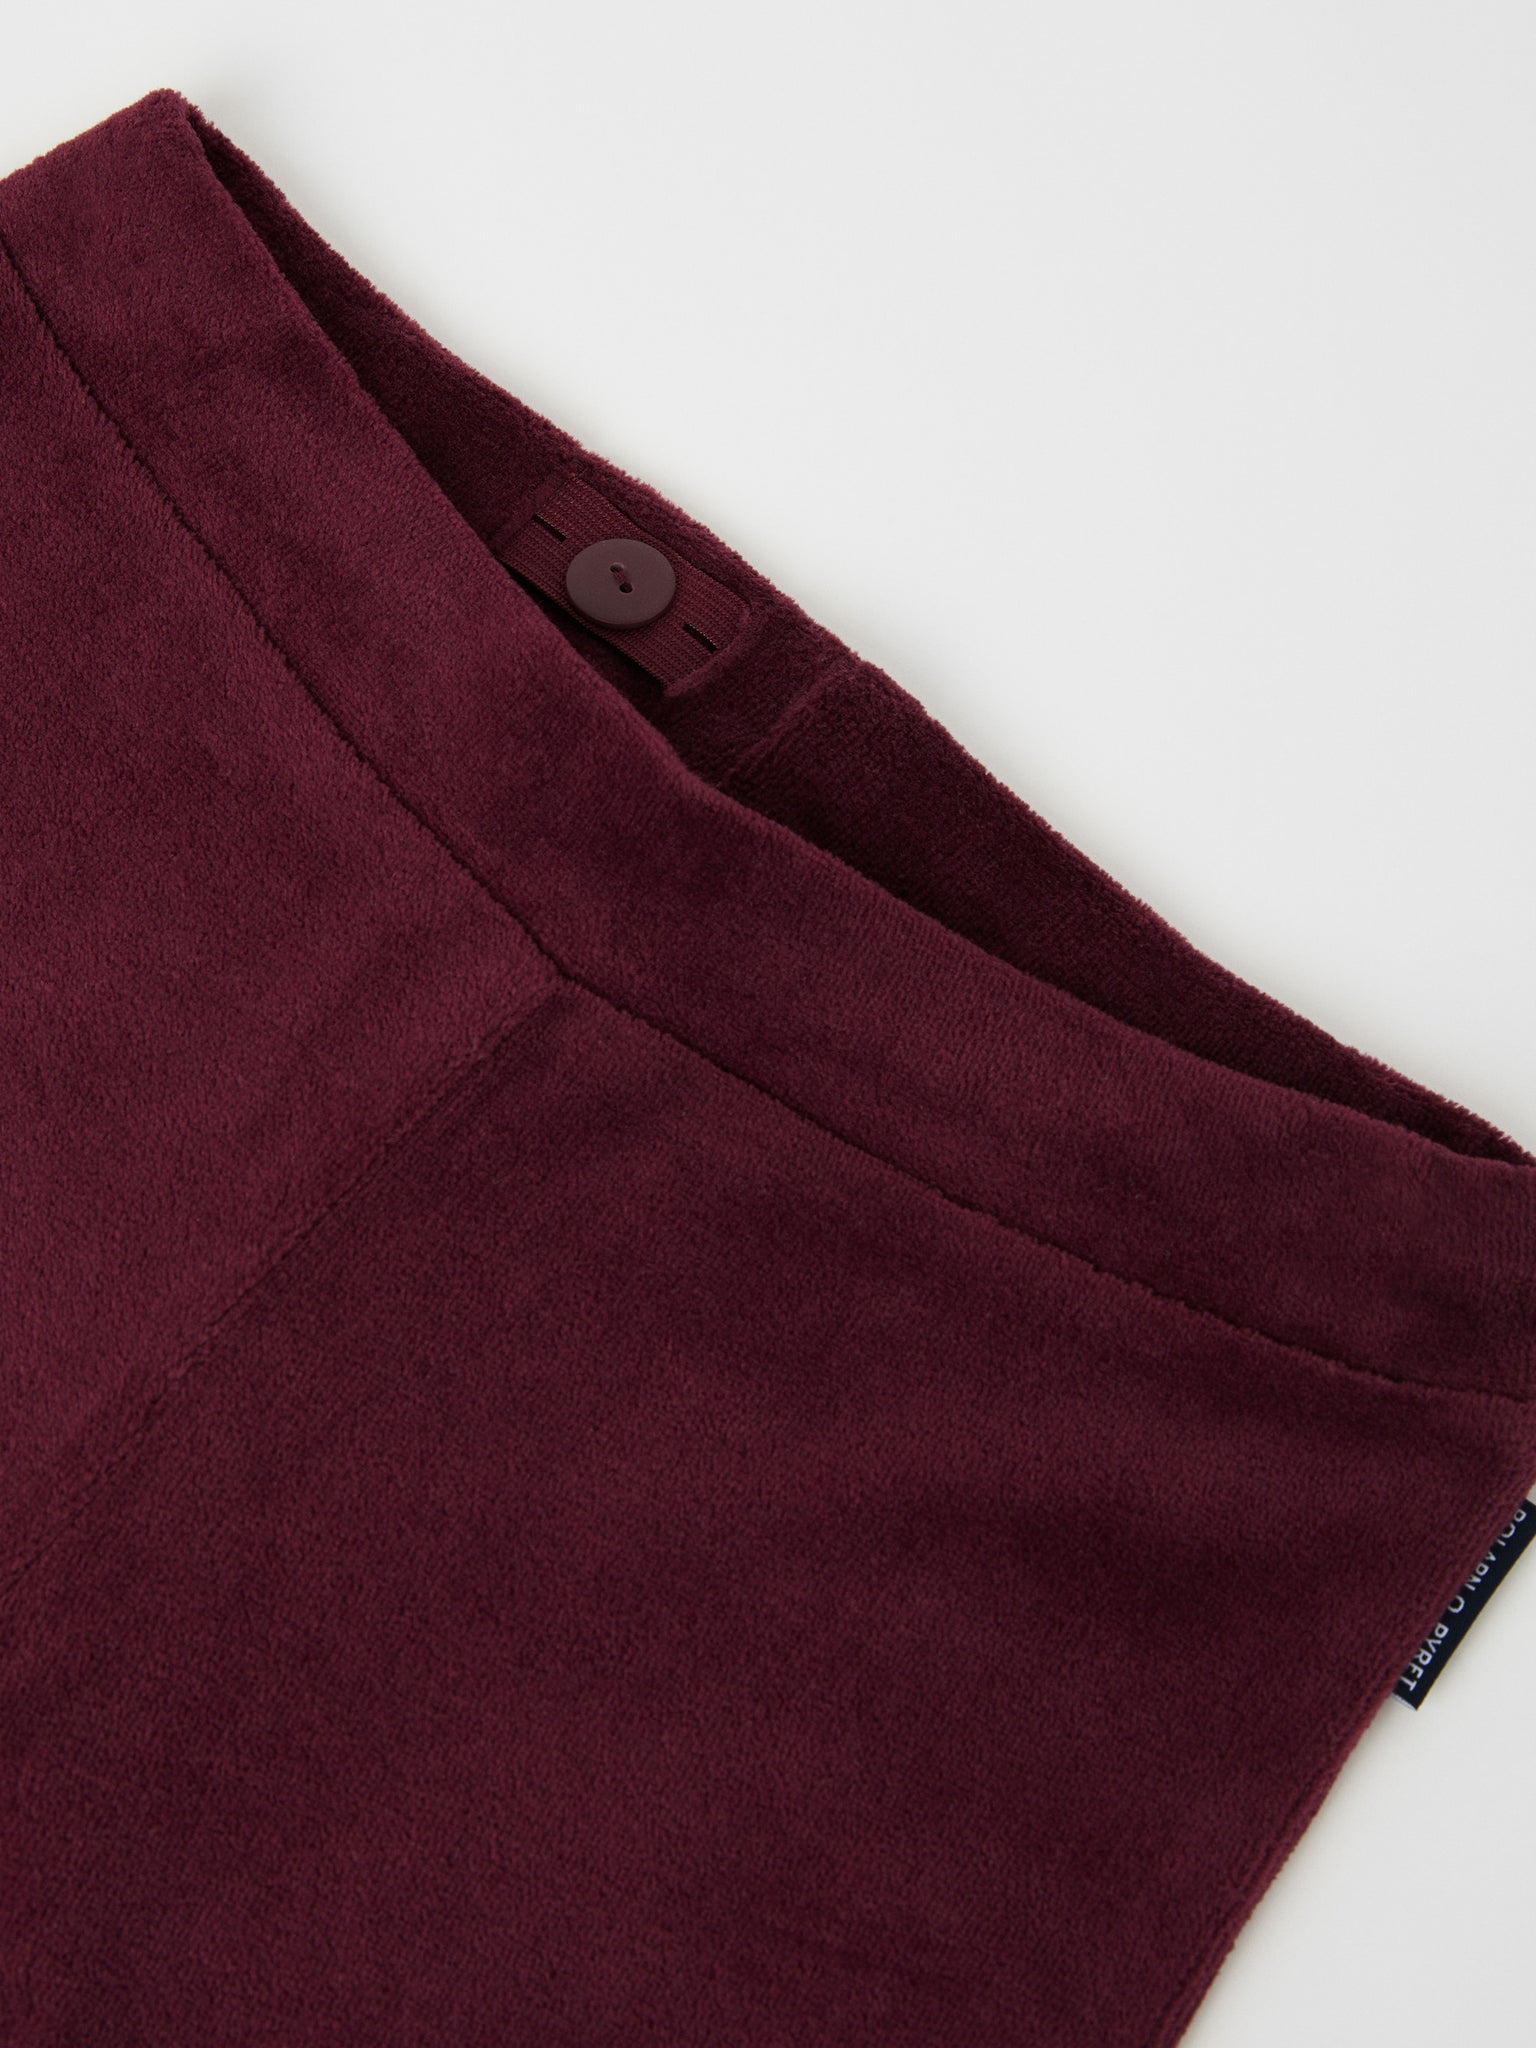 Burgundy Kids Velour Cotton Trousers from the Polarn O. Pyret kids collection. Nordic kids clothes made from sustainable sources.